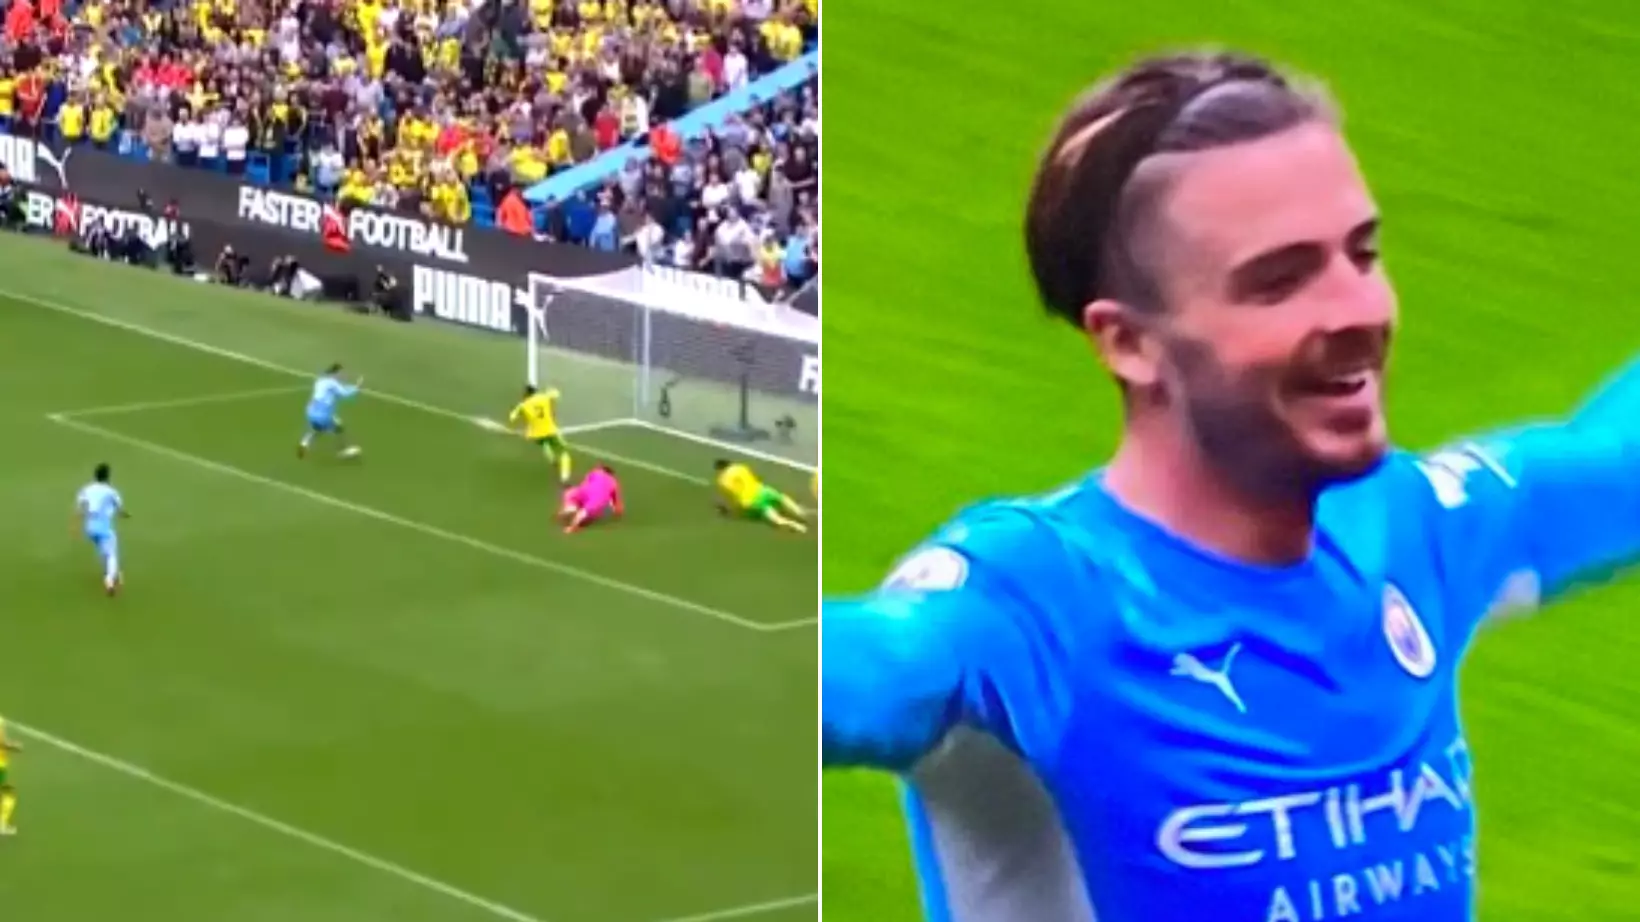 Jack Grealish Bags His First Man City Goal - It's The Flukiest He'll EVER Score